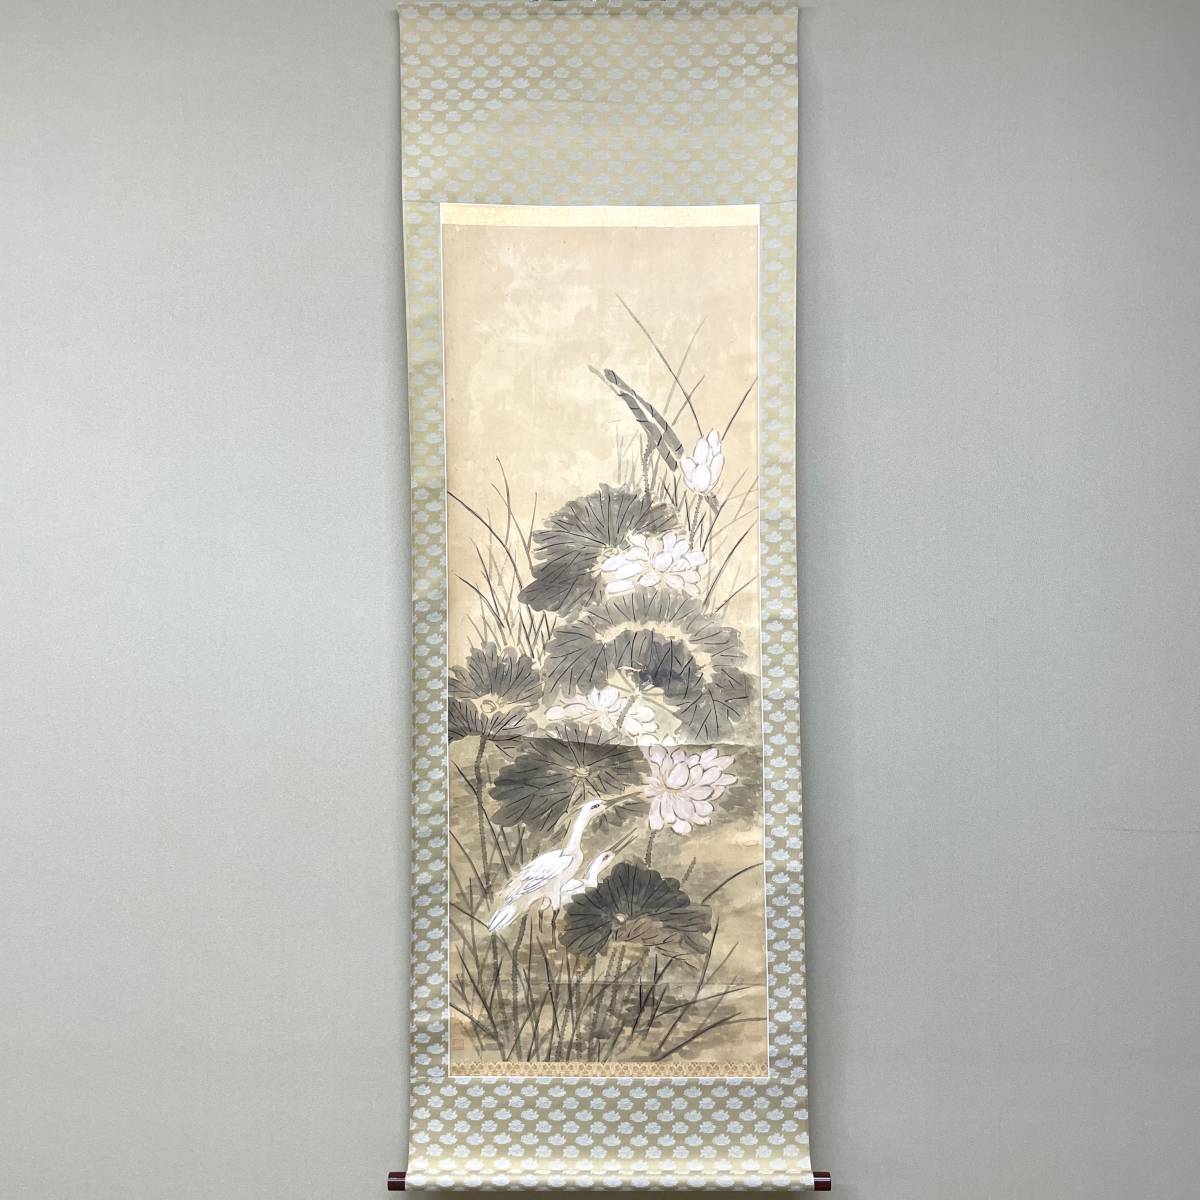 ★Closing sale! ★Sold out for 1 yen! ★Can be shipped together ★Hanging scroll ★Ito Keisui ★Lotus and heron illustration ★Authentic work ★Comes with paulownia box ★Authenticity guaranteed ★Long-term storage item ★Nitten committee member, painting, Japanese painting, flowers and birds, birds and beasts